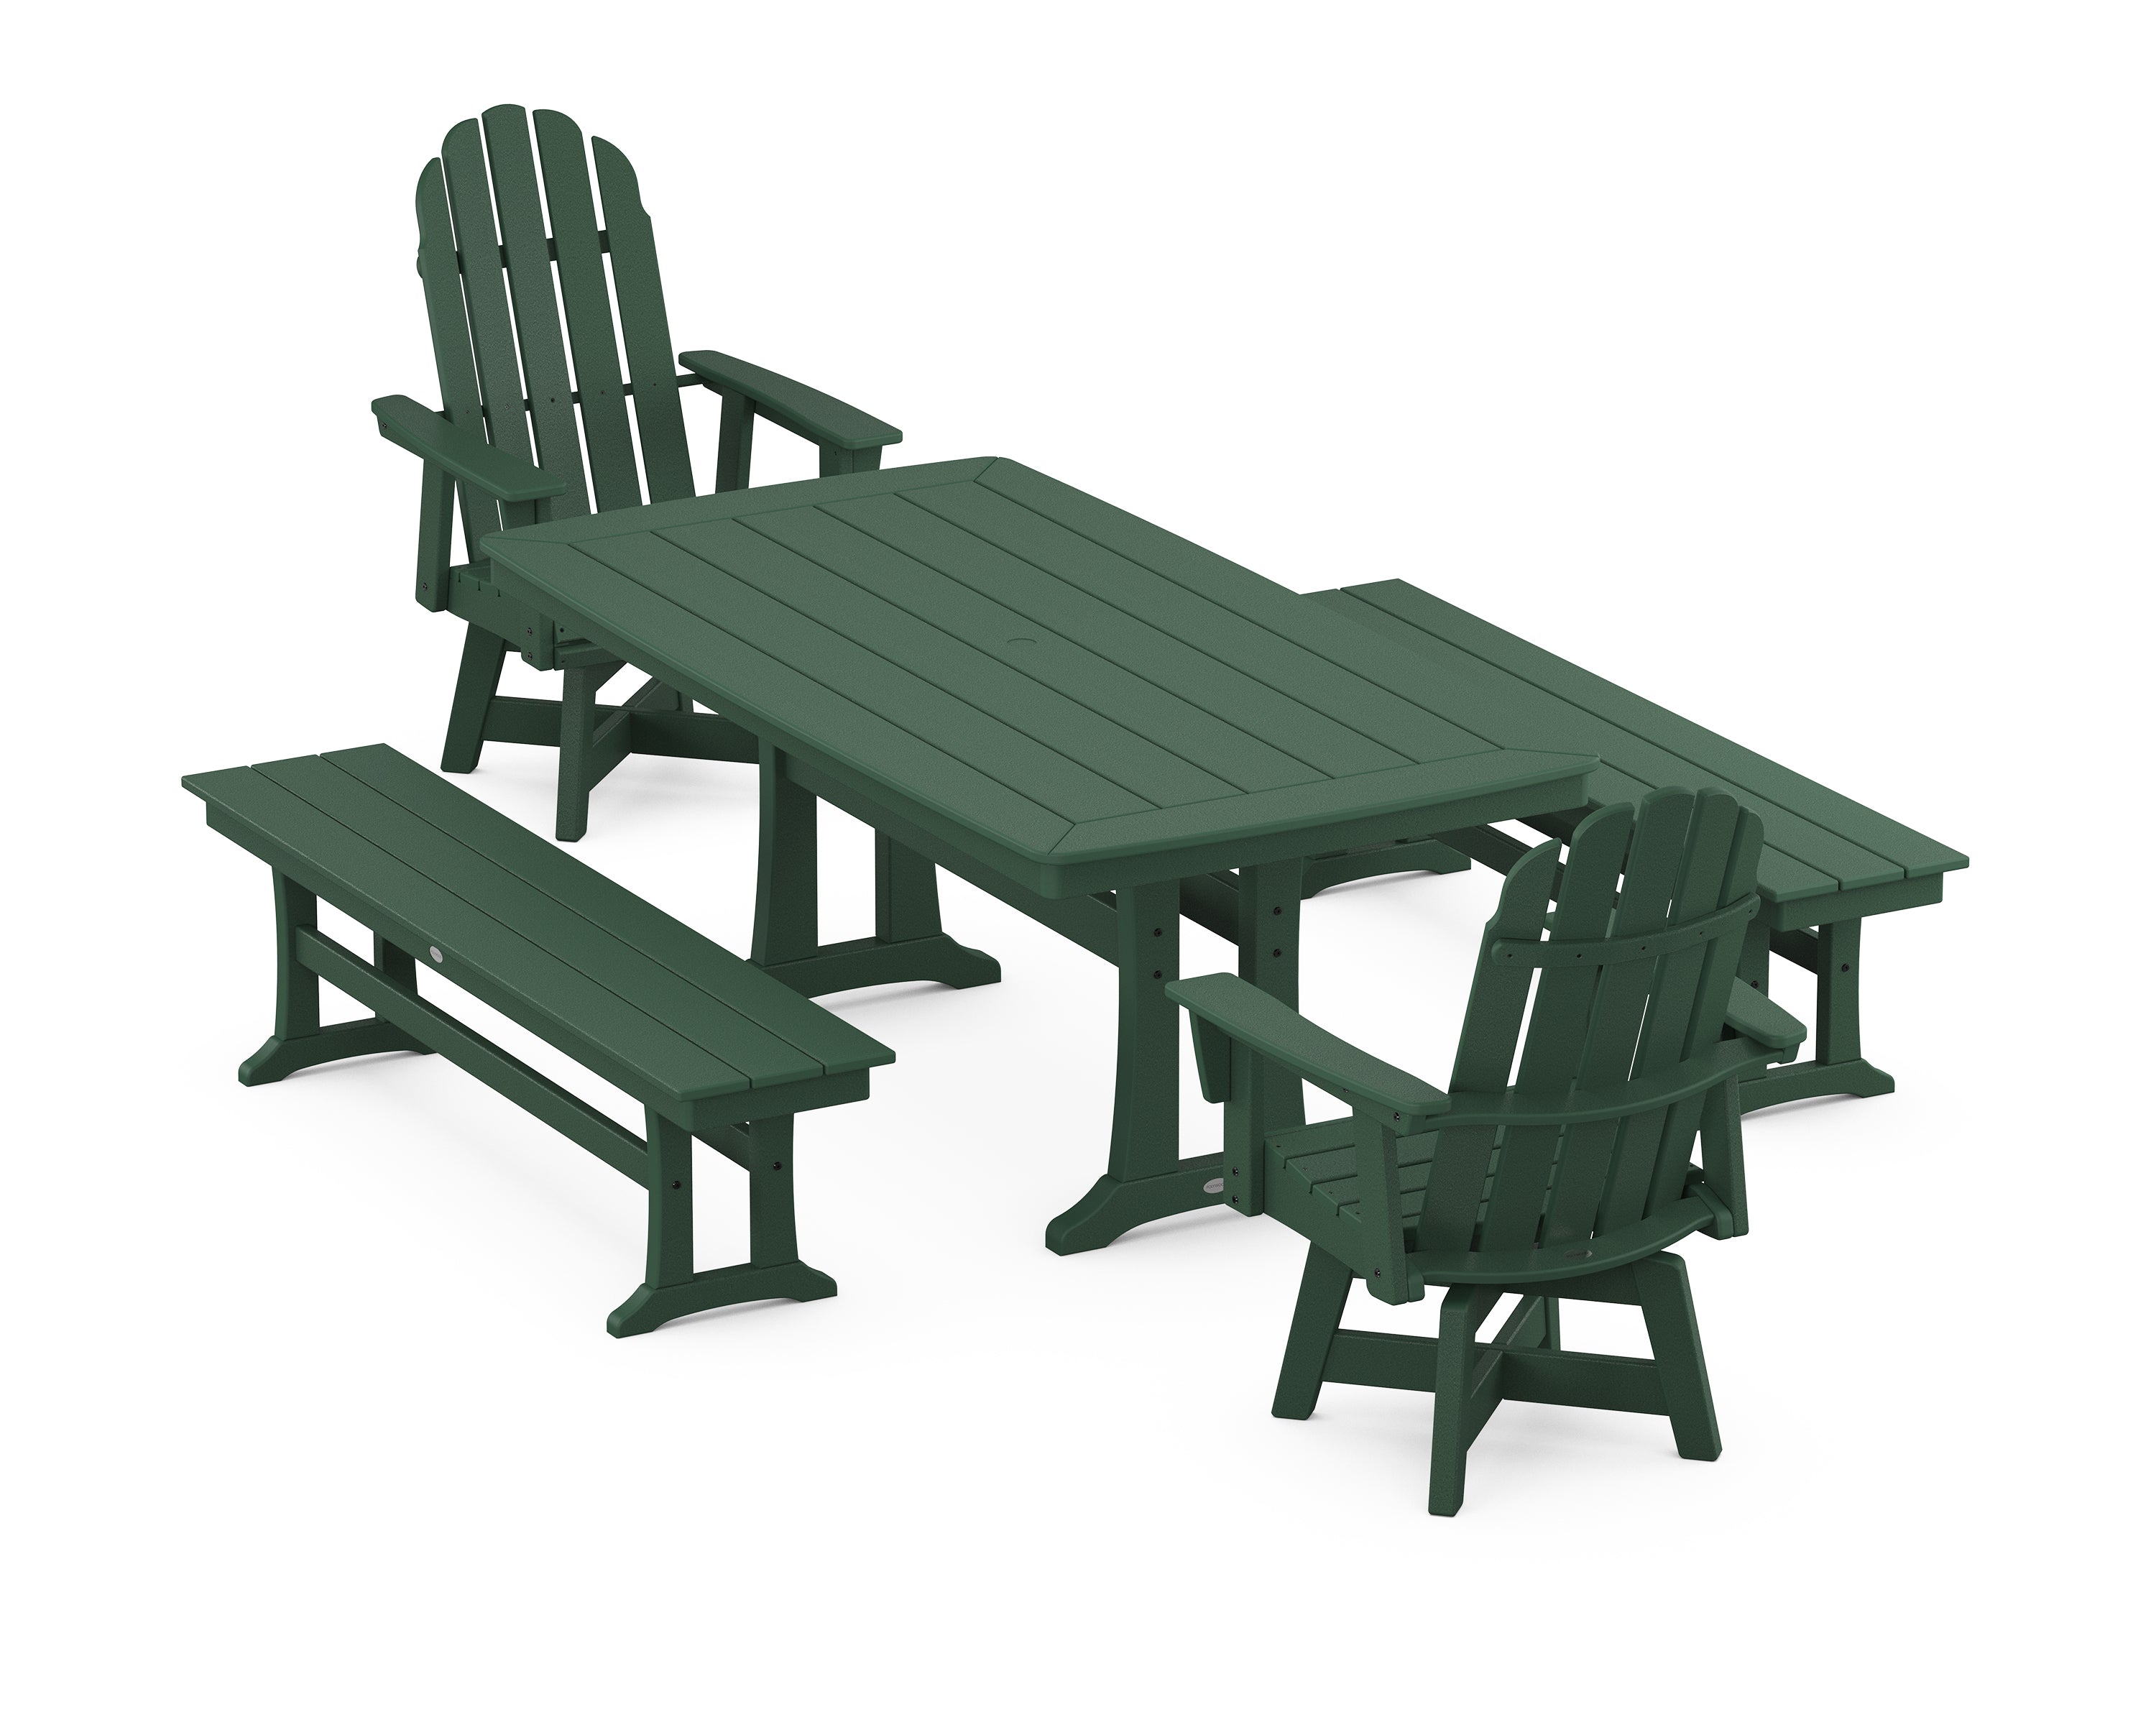 POLYWOOD® Vineyard Adirondack Swivel Chair 5-Piece Dining Set with Trestle Legs and Benches in Green